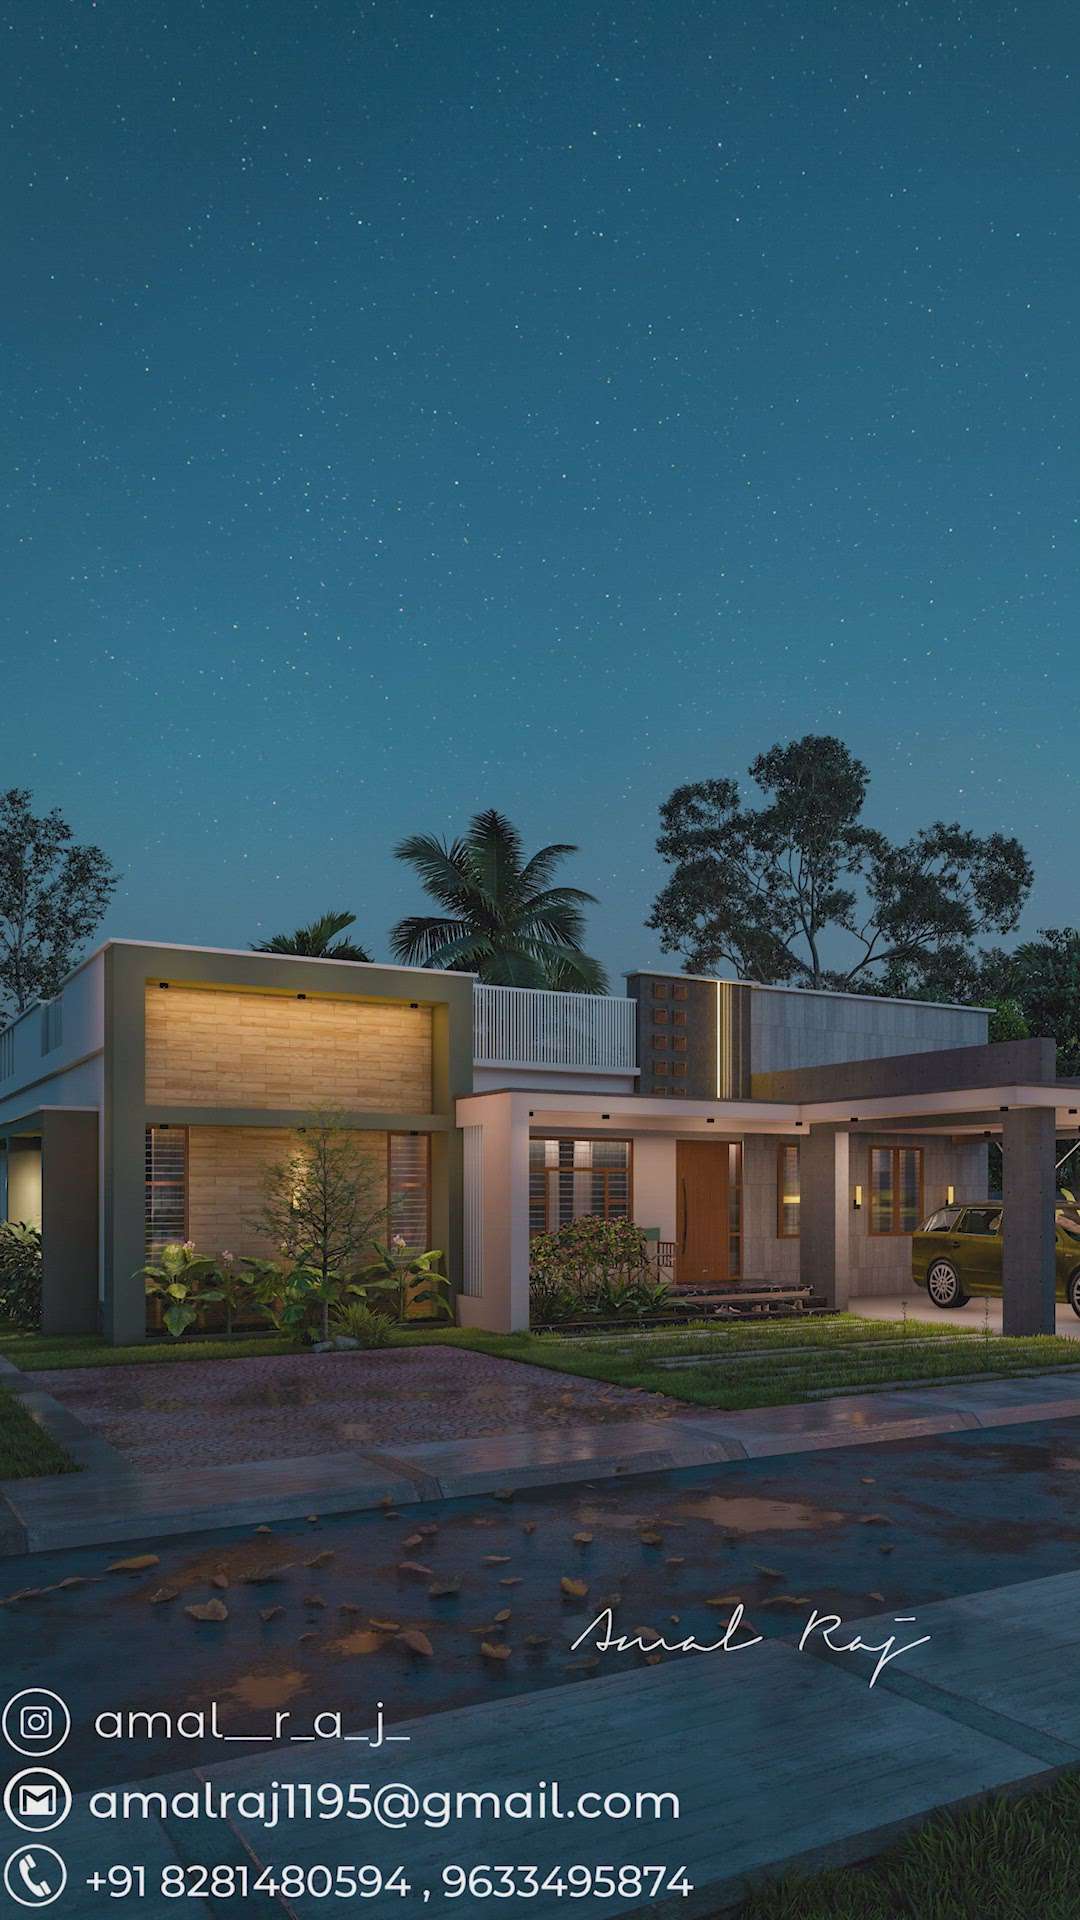 4bhk home❤️

#trending #trend #sketchup
#lumion11
#3ds #3dvisualization #Interiorforyou
#interiordesign
#interiordesigner 
#interiordesigner #3dwork #3delivationdesigning #lumion11 #render #design #homedesign #keralahomeplanners #keralahomes #keralabuildersanddevelopers #interiordesign #keralahomes #keralabuildersanddevelopers
#interiordesign 
#interiordesign 
#decorlovers 
#Interiorforyou
#homedecor 
#decorlovers 
#homedecoration 
#InstaDecor #instahome #instadesigns @keralahomeplanners @kerala_homes_design @kerala_home_designs1 @iritty_onlinemarket @kerala__home_ @keralahousedesigns @keralahome_interiorexterio